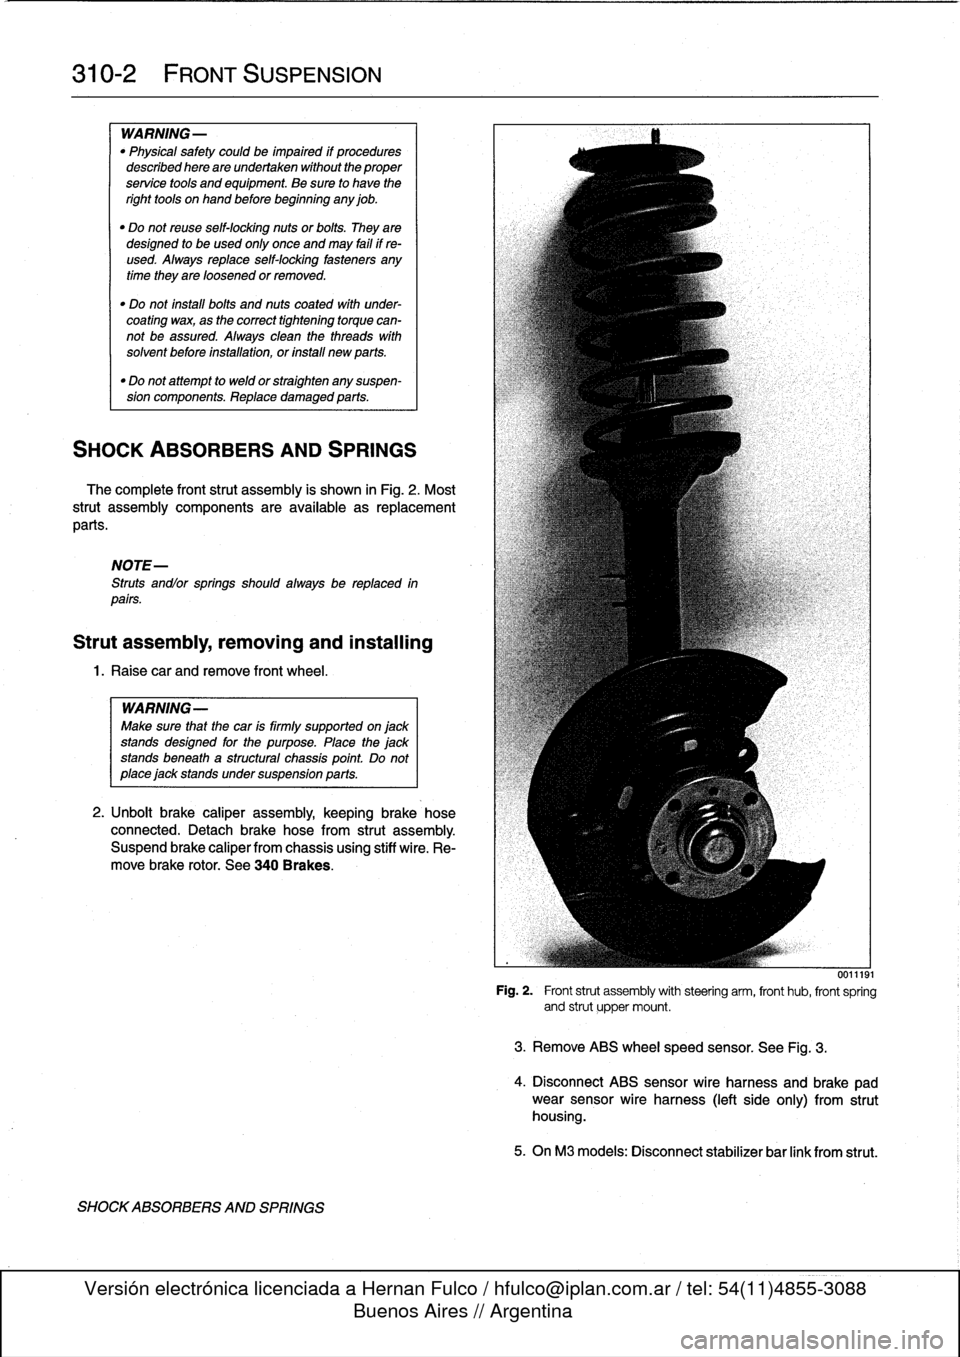 BMW 323i 1998 E36 User Guide 
310-2

	

FRONT
SUSPENSION

WARNING-

"
Physical
safety
could
be
impaired
if
procedures
described
here
areundertaken
without
the
proper
service
tools
and
equipment
.
Be
sure
to
have
the
right
tools
o